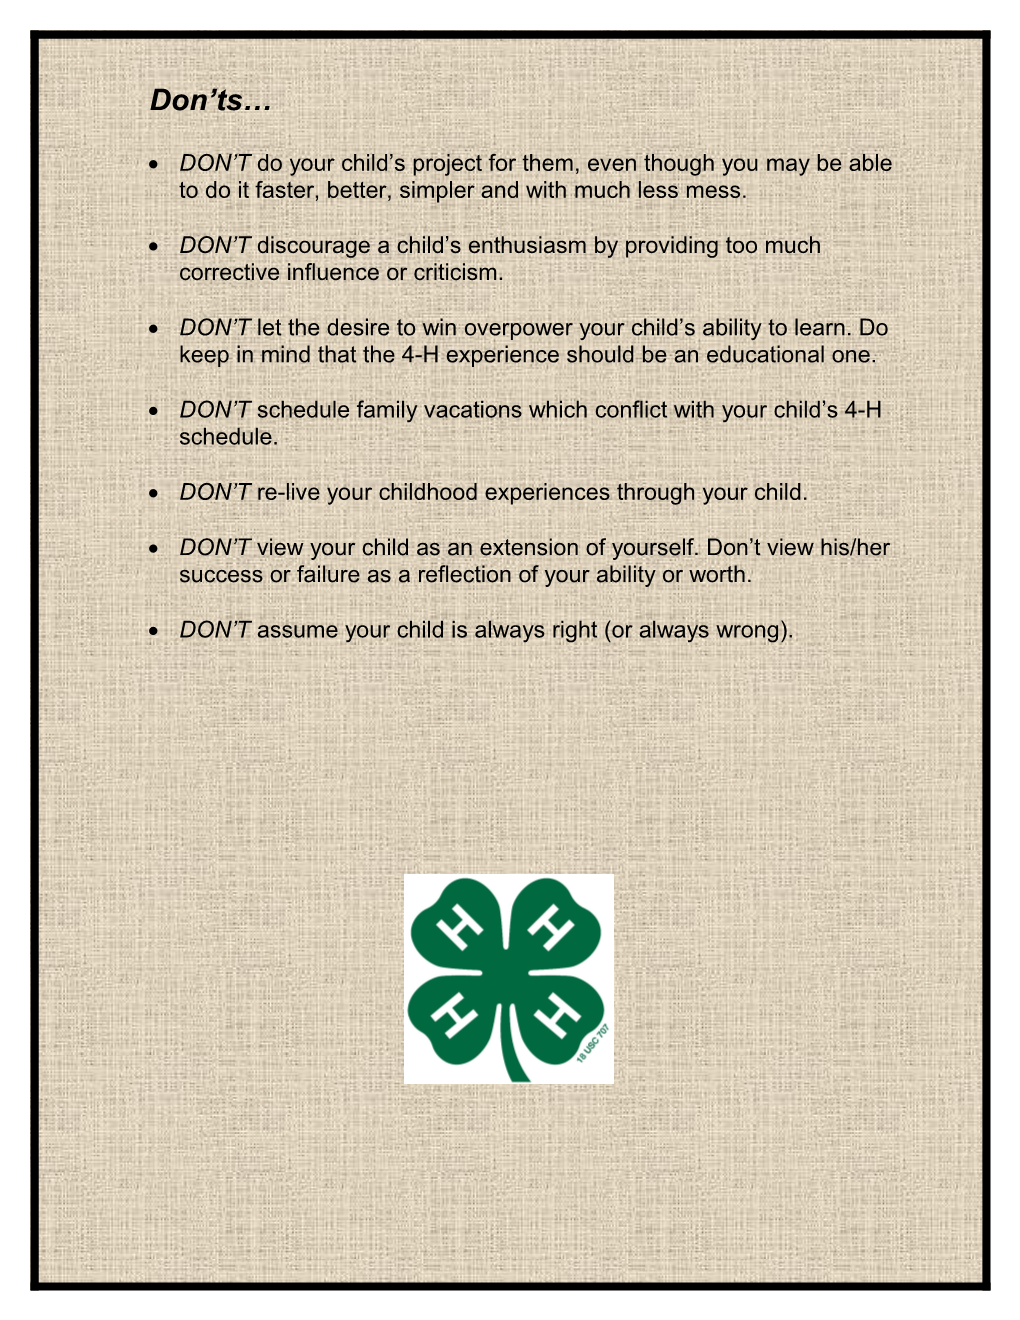 Do S and Don Ts of Being a 4-H Parent